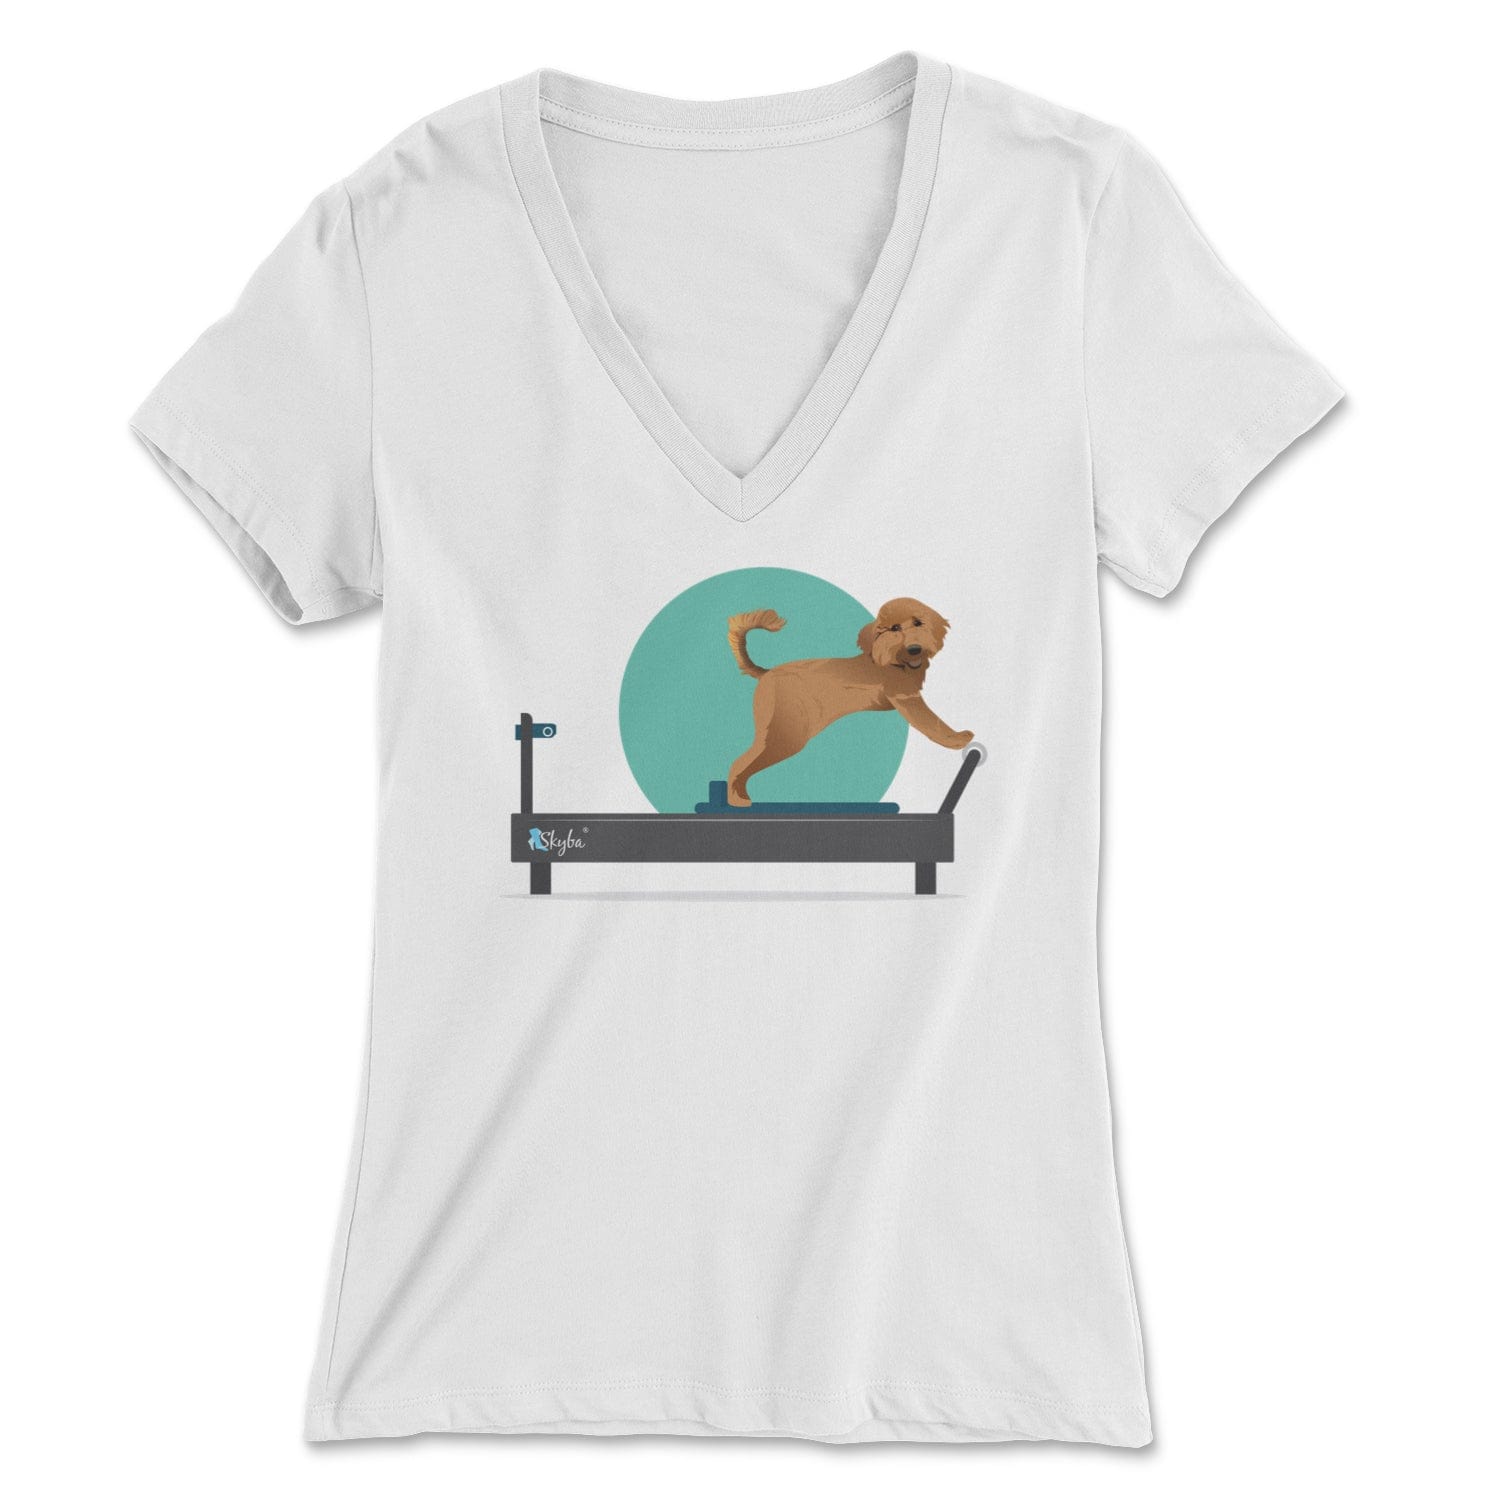 Goldendoodle on the Reformer - Women's V-Neck Tee Skyba Print Material